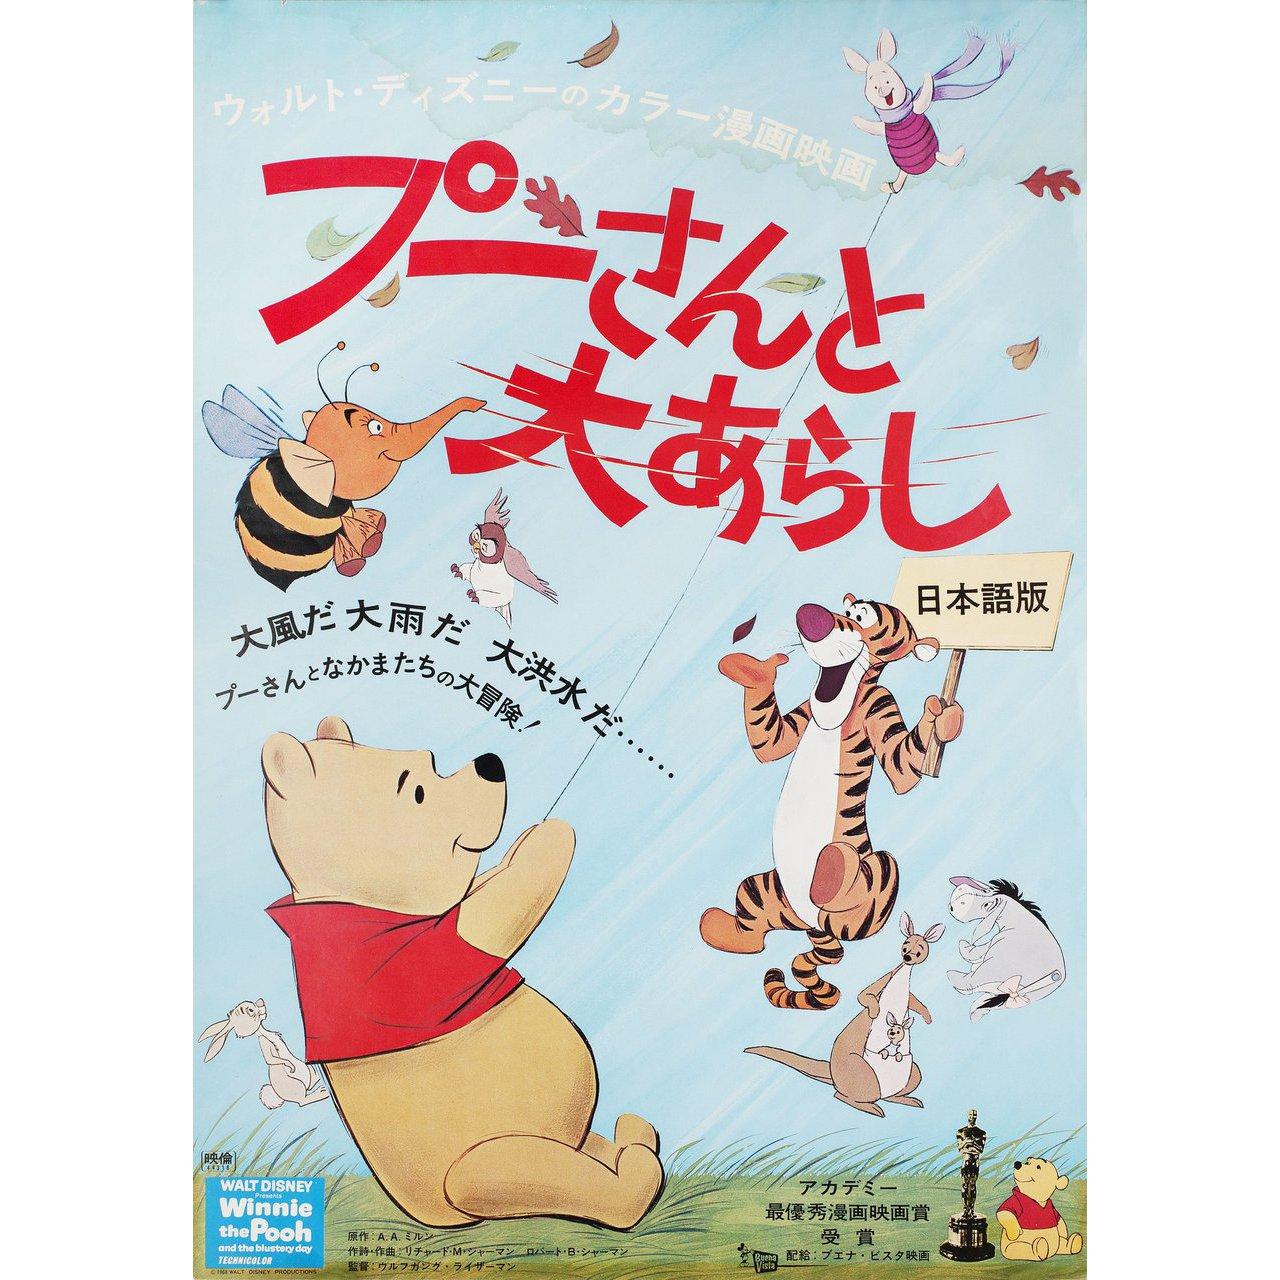 Original 1970 Japanese B2 poster for the first Japanese theatrical release of the film Winnie the Pooh and the Blustery Day directed by Wolfgang Reitherman with Sebastian Cabot / Sterling Holloway / John Fiedler / Jon Walmsley. Good-Very Good